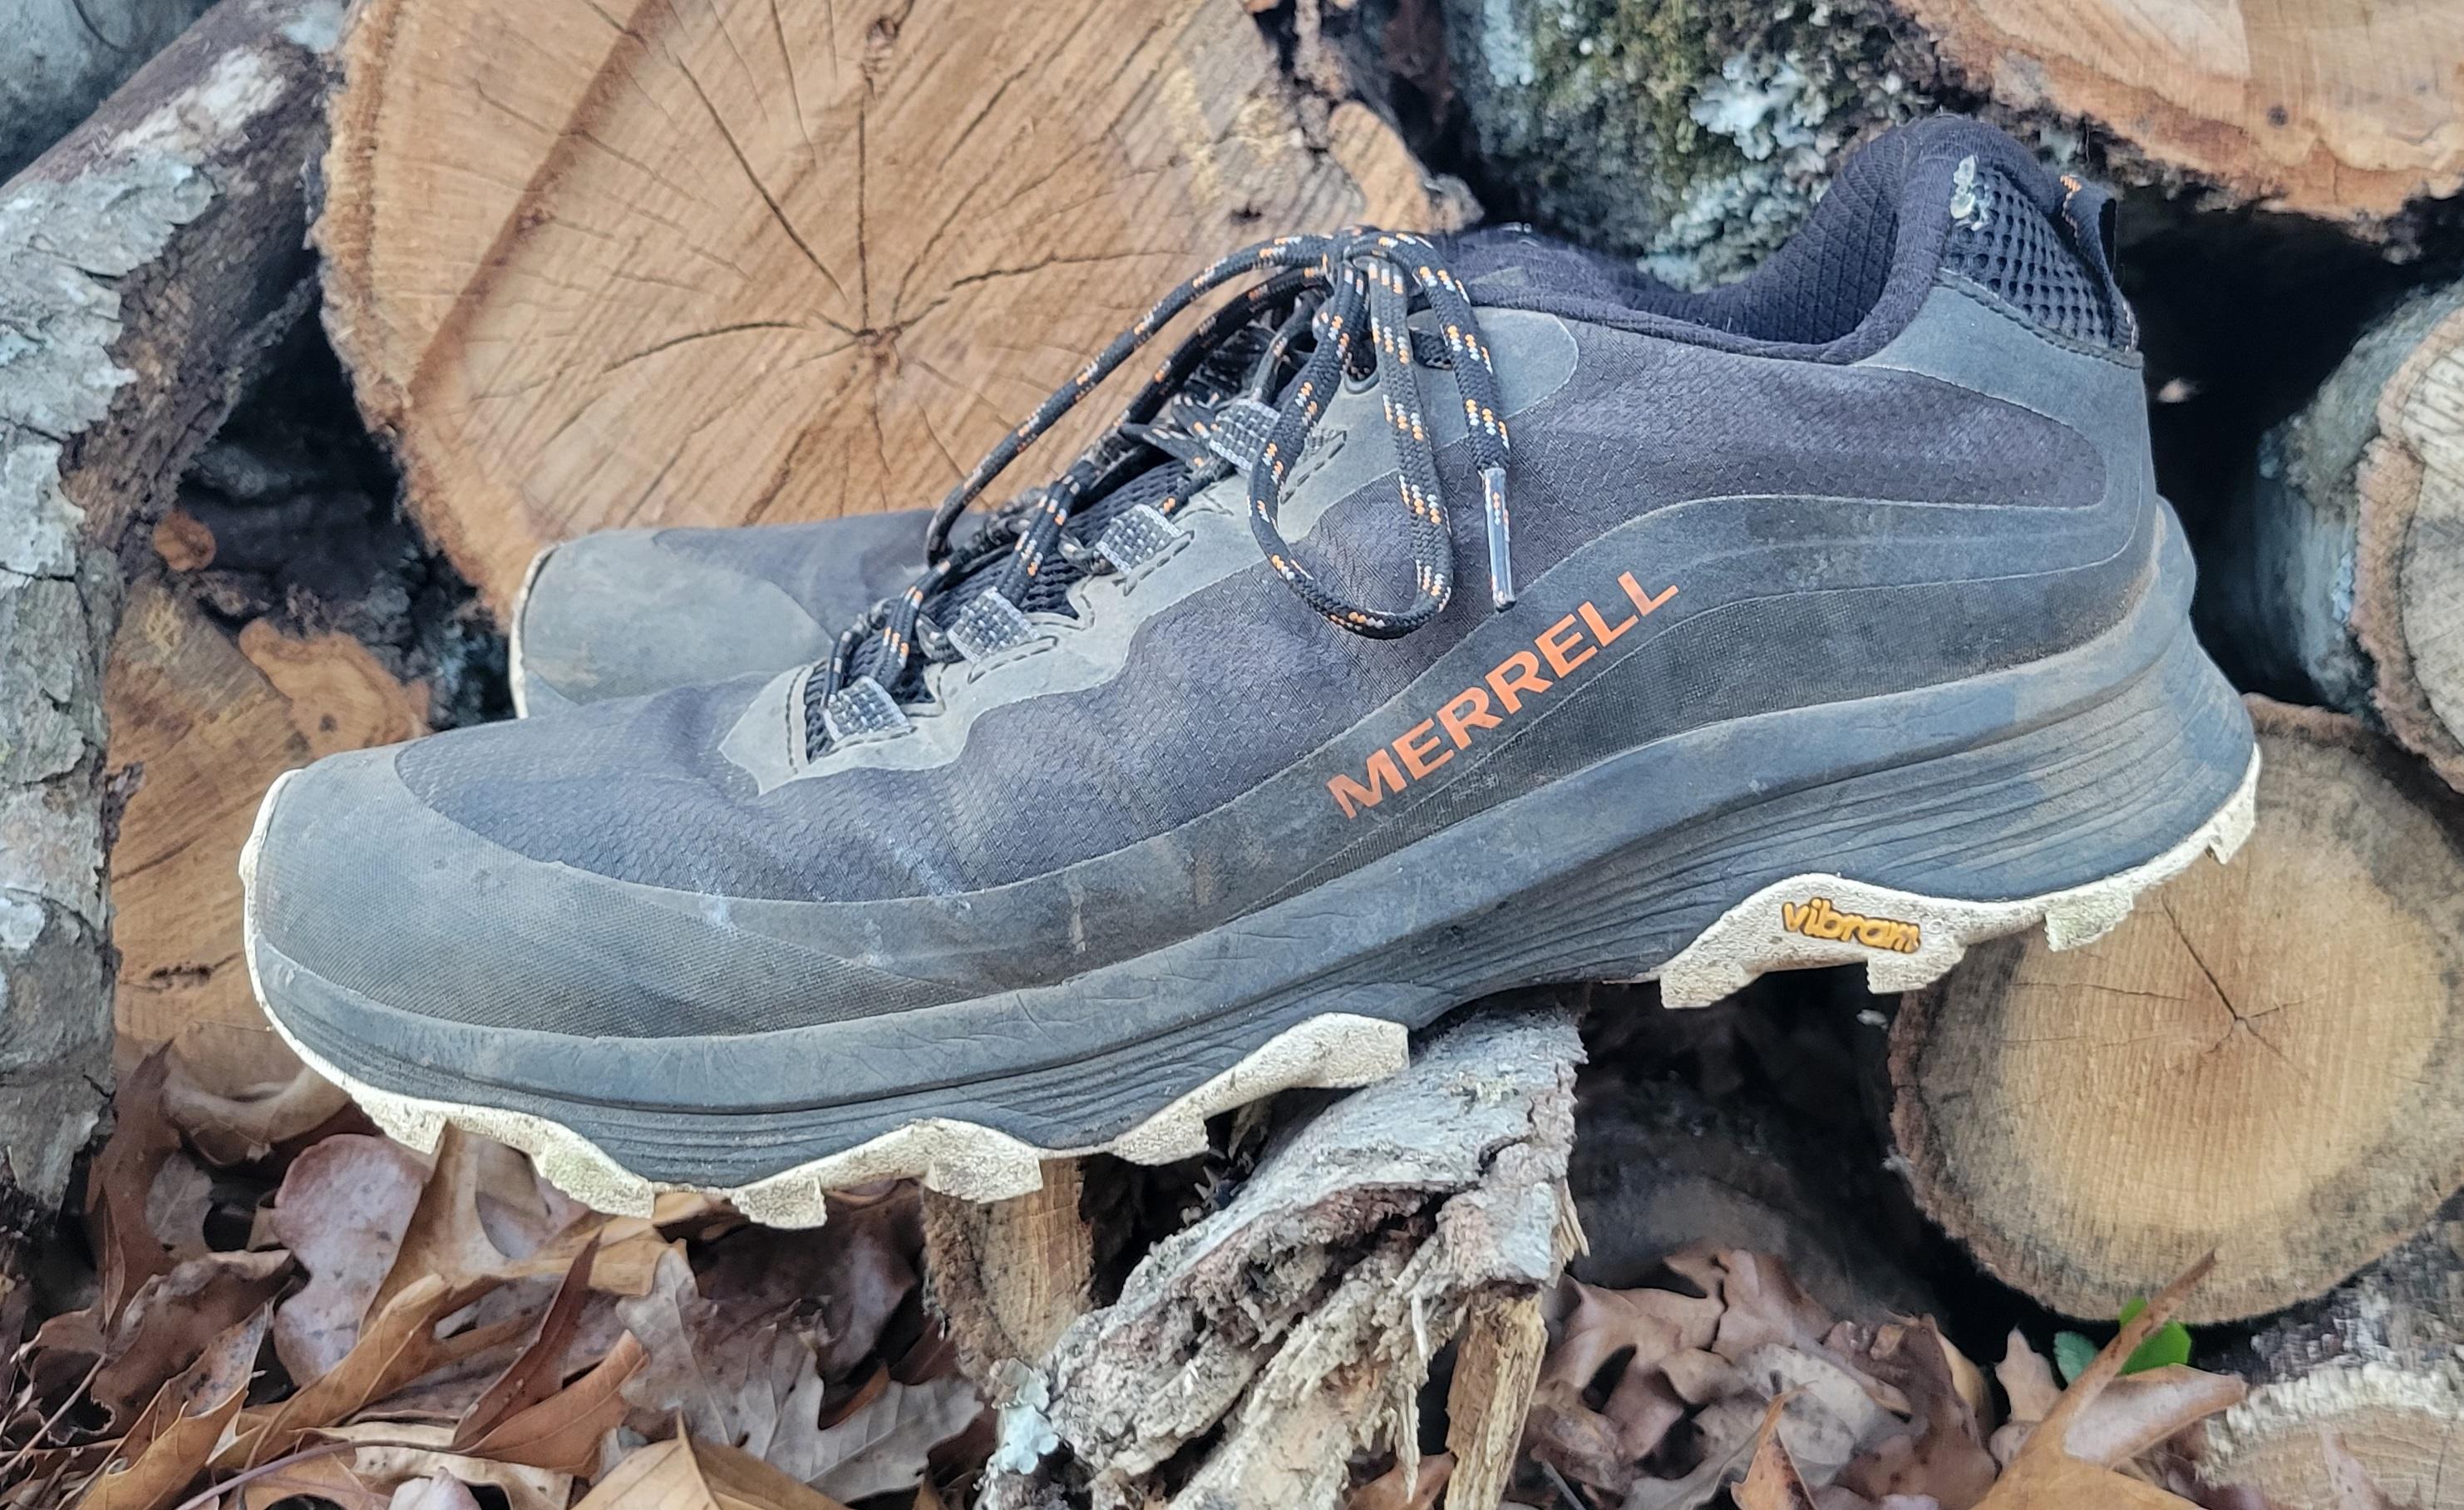 Merrell Moab Speed Review, Facts, Comparison